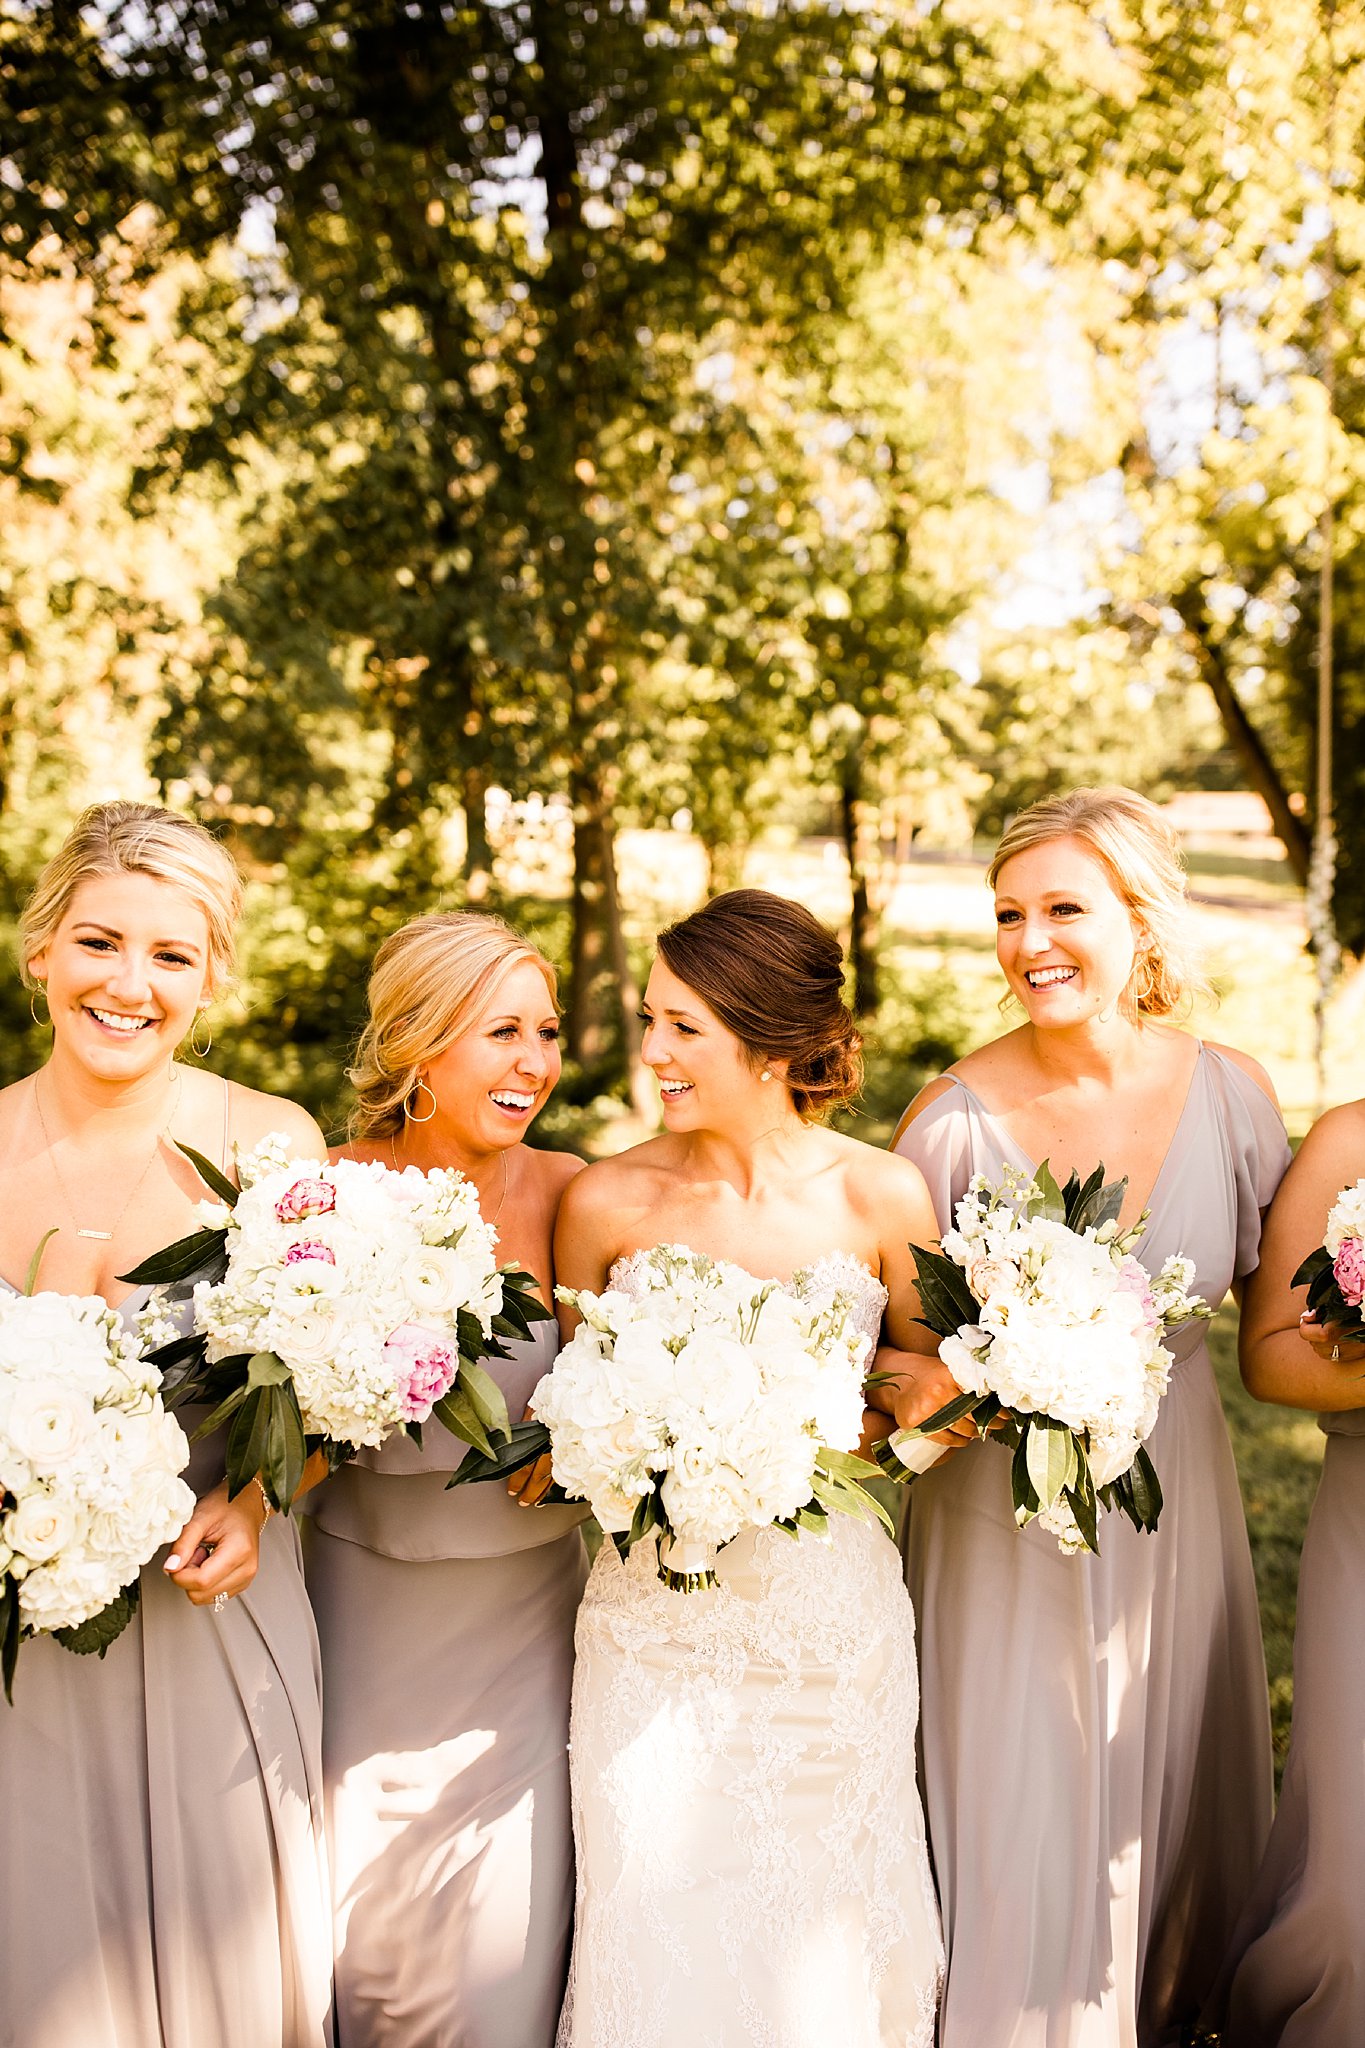 Stone House of St. Charles Wedding, Bride and bridesmaids wearing gray bridesmaid dresses